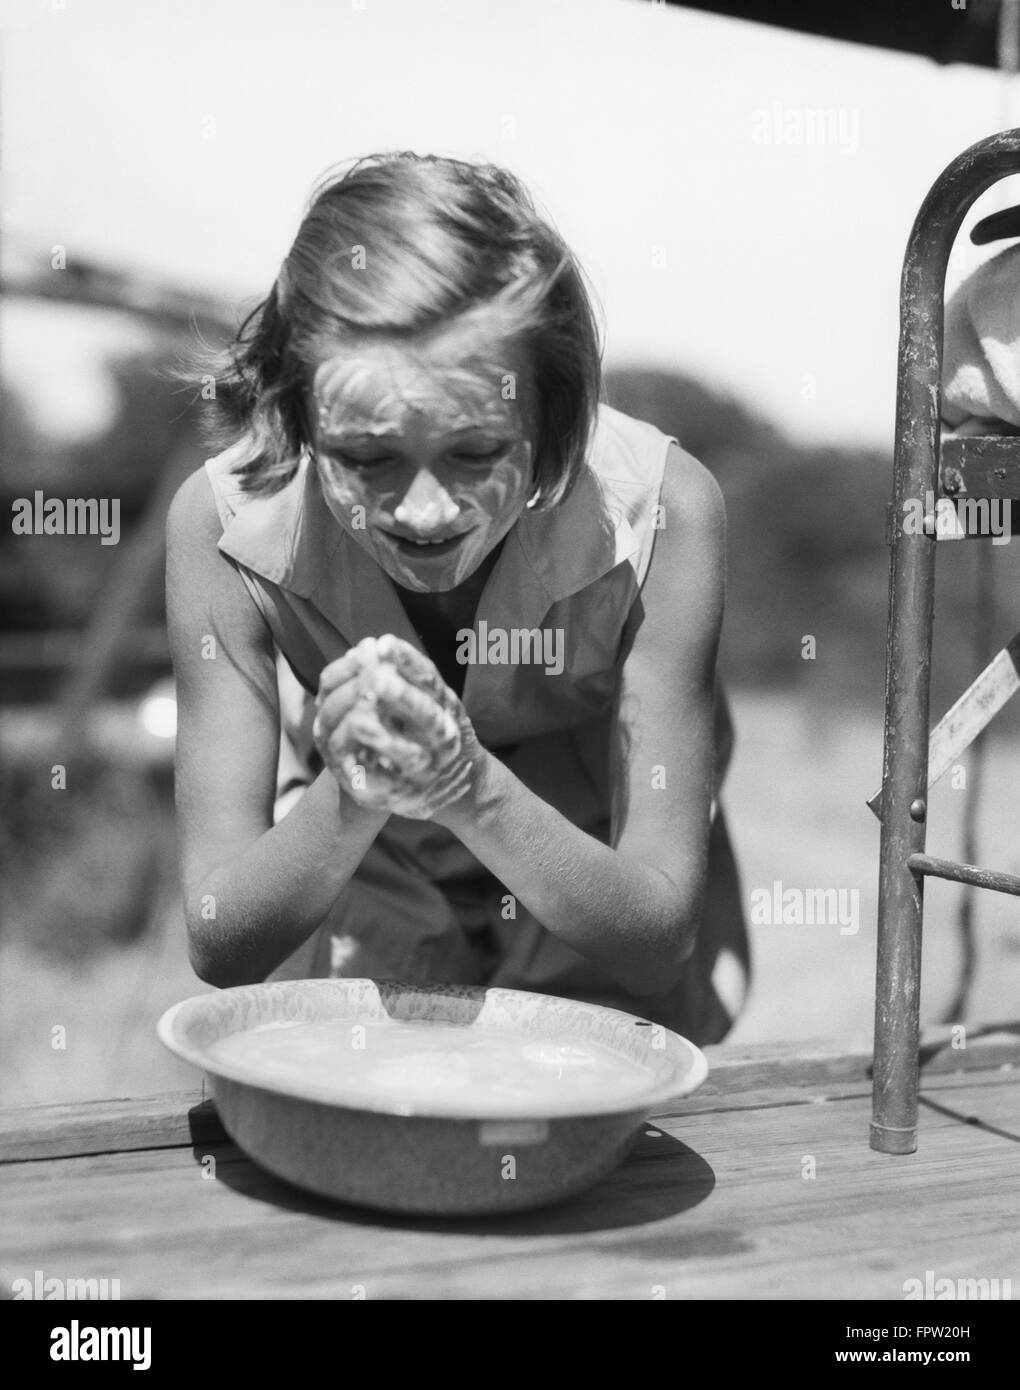 1930s YOUNG GIRL LEANING OVER BOWL WASHING HANDS AND FACE WITH SOAP AT SUMMER CAMP OUTDOORS Stock Photo